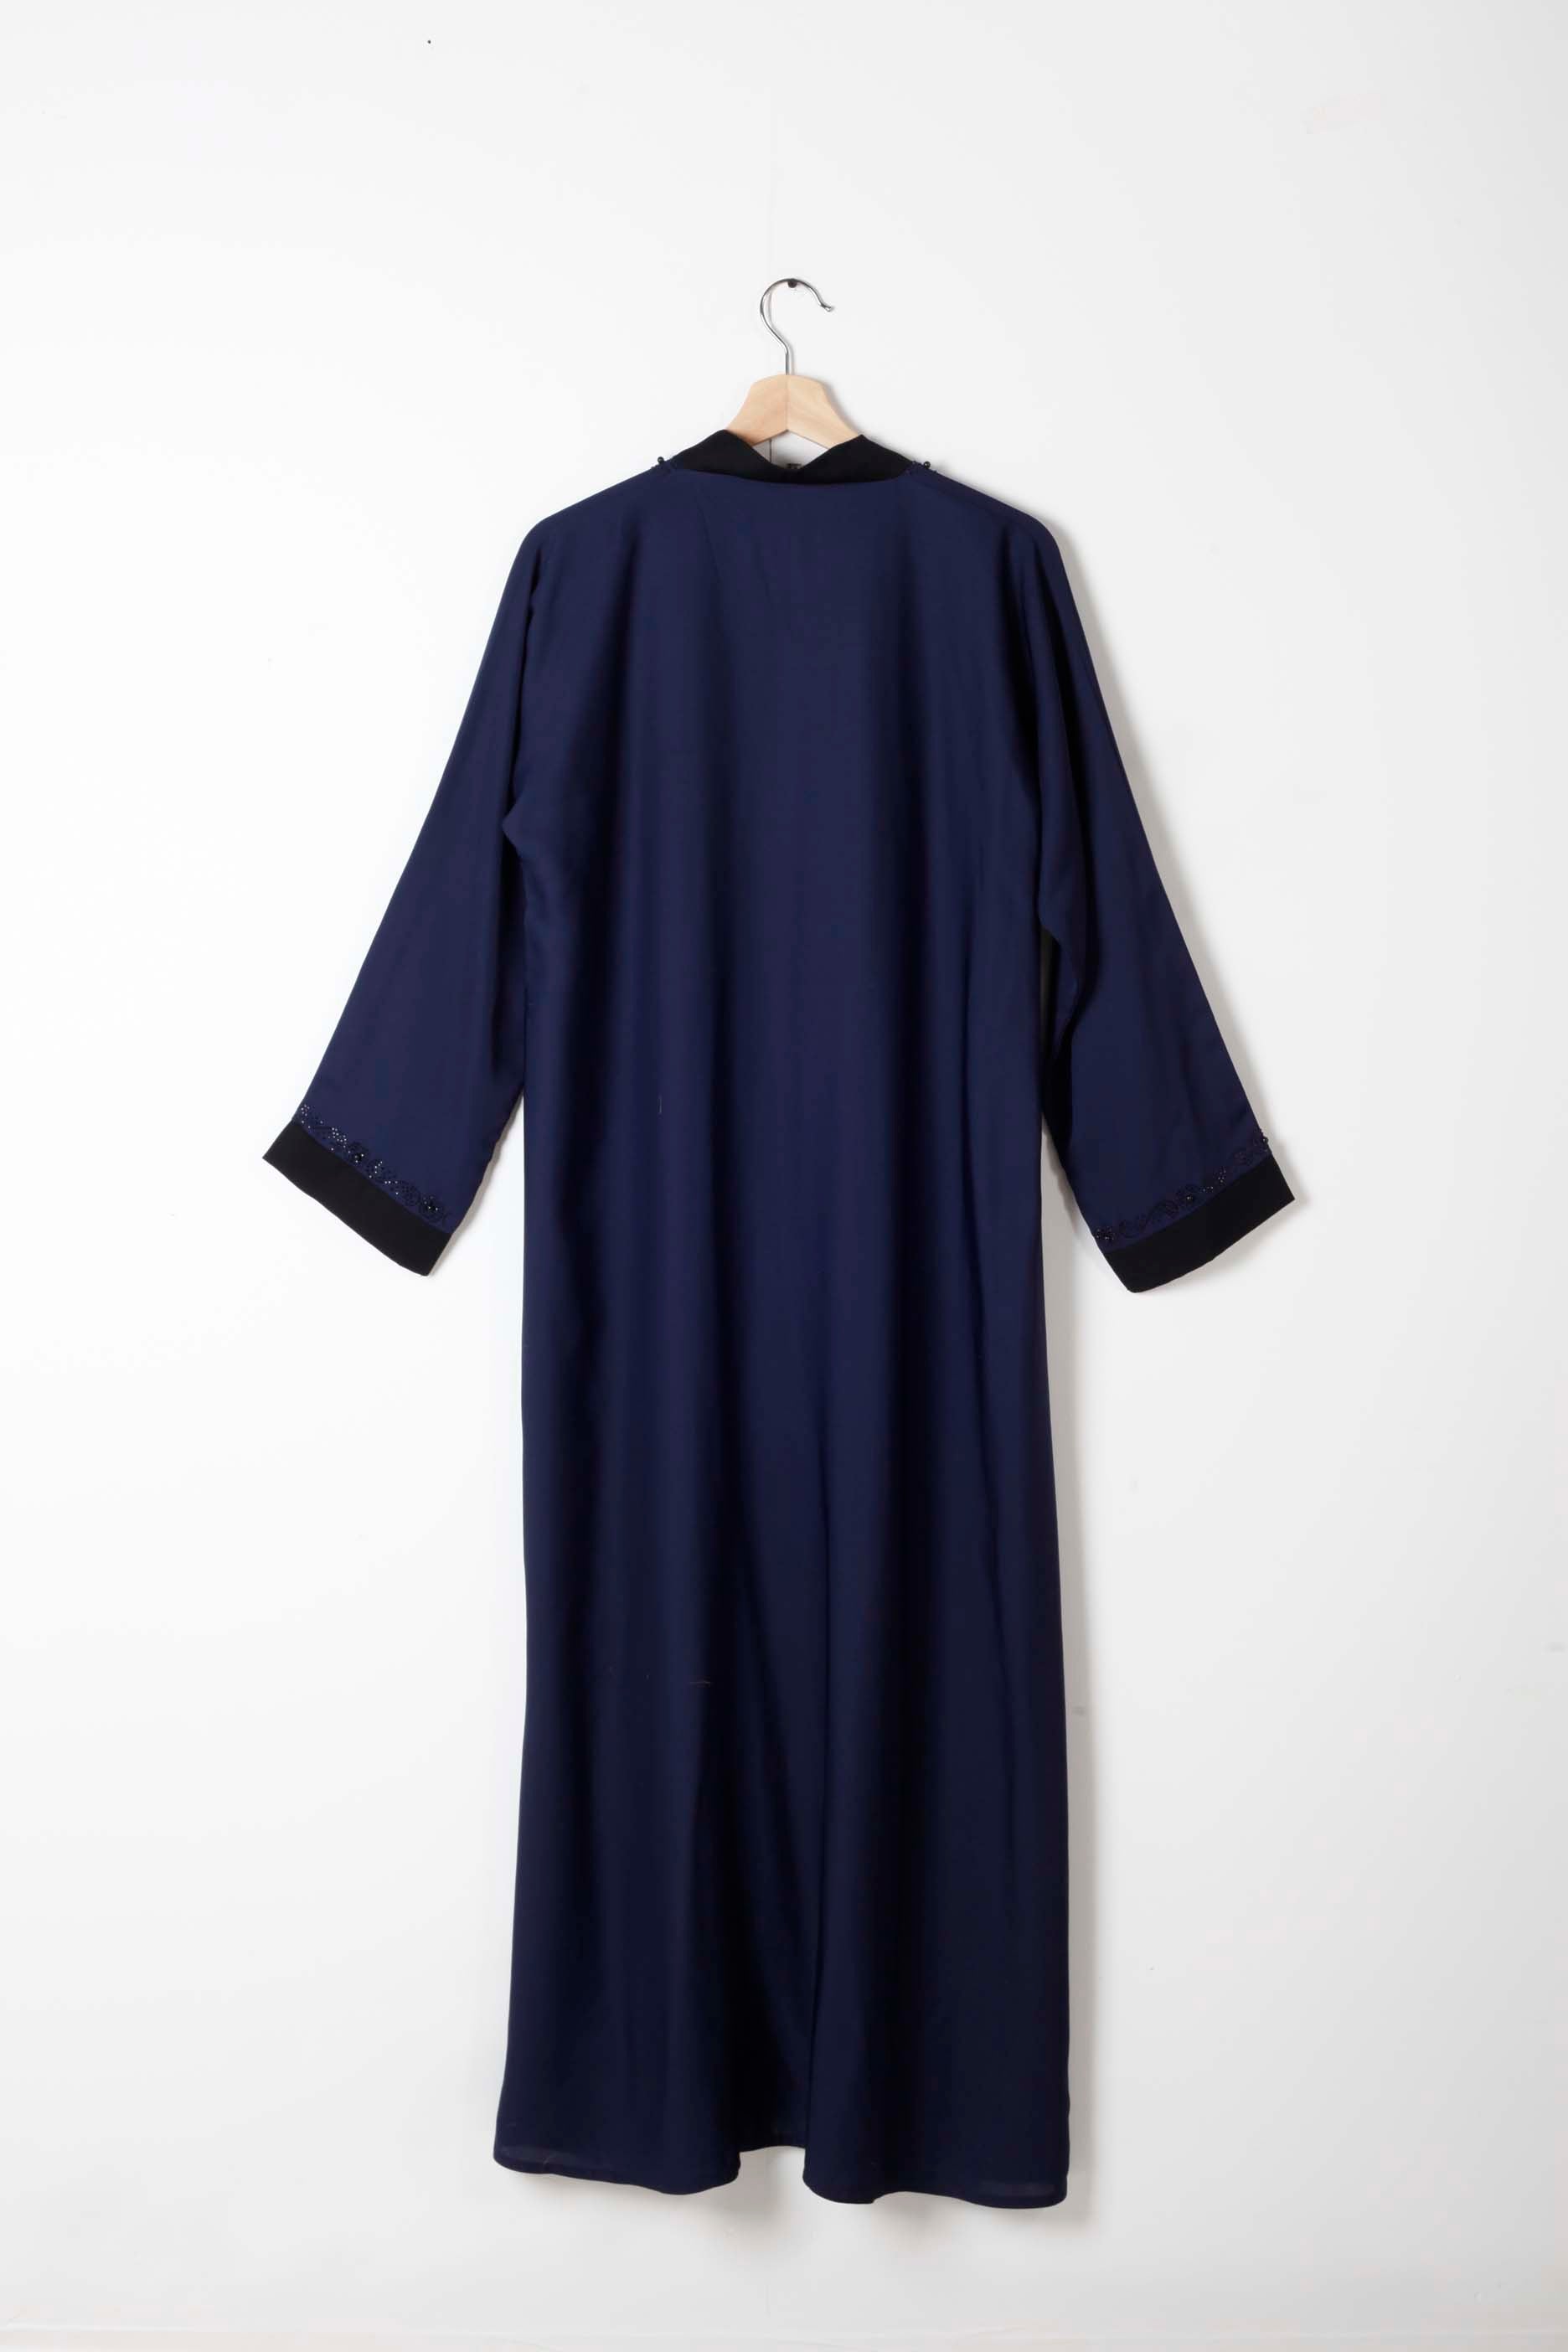 Navy Blue Abaya with Sequin Embroidery